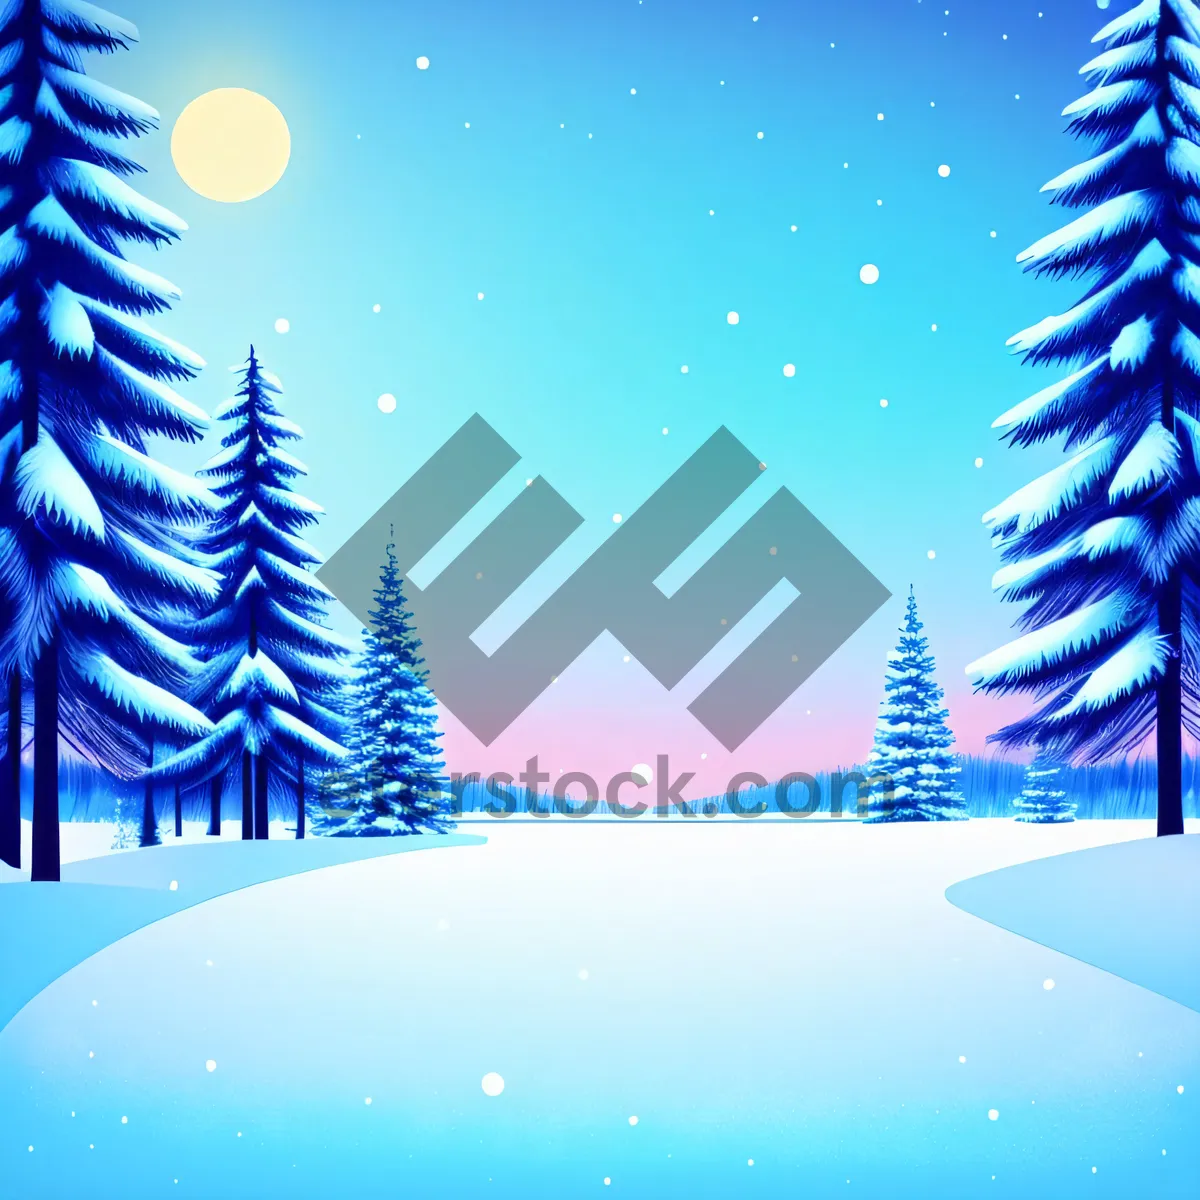 Picture of Winter Wonderland: Festive Evergreen Tree with Snowflake Decor